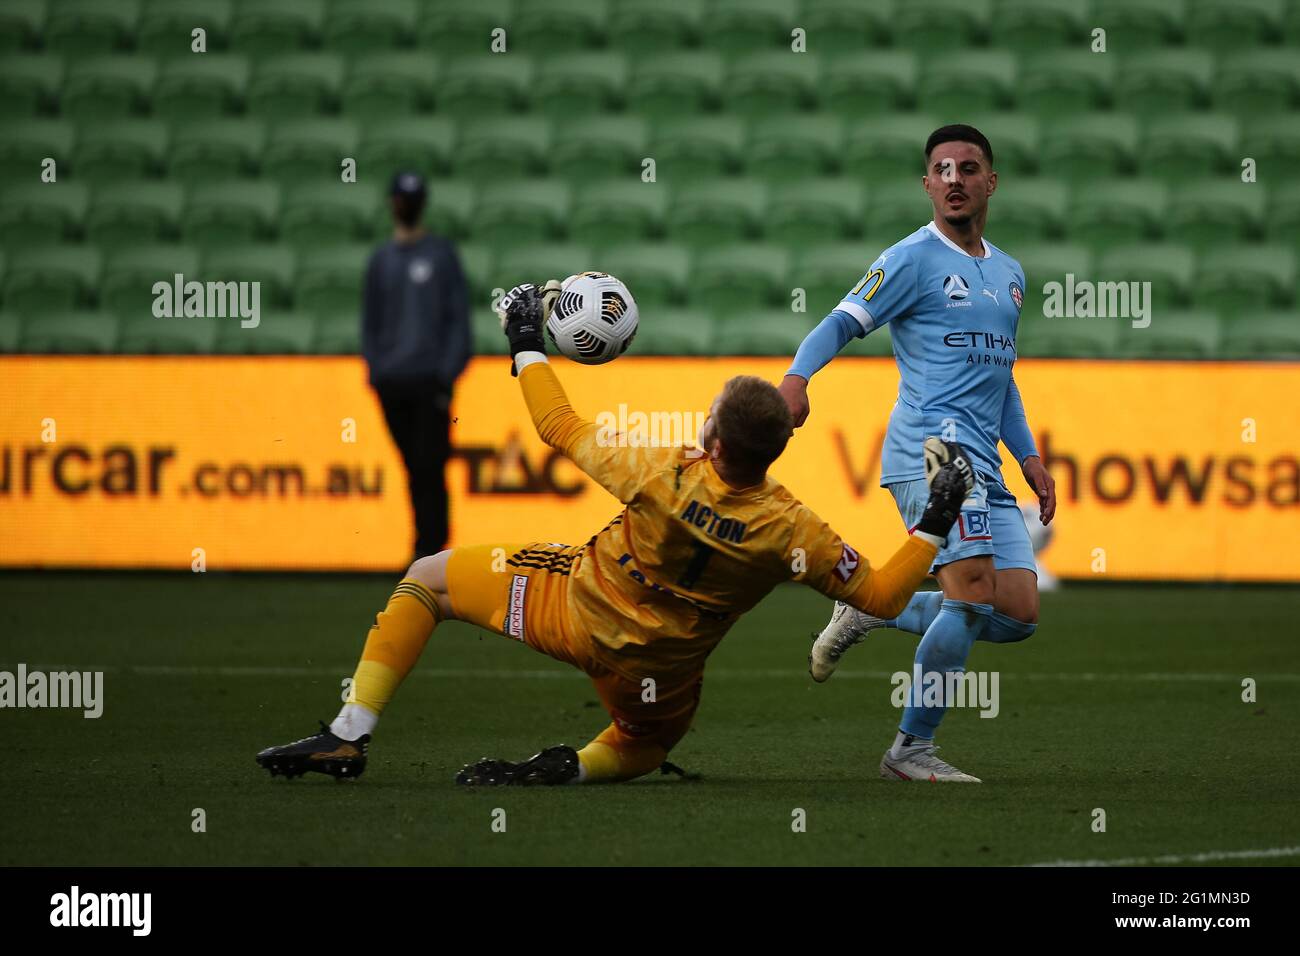 Melbourne, Australia, 6 June, 2021. Matt Acton of Melbourne Victory blocks the ball during Round 24 of the Melbourne Victory v Melbourne City FC A-League match, Australia. Credit: Dave Hewison/Alamy Live News Stock Photo